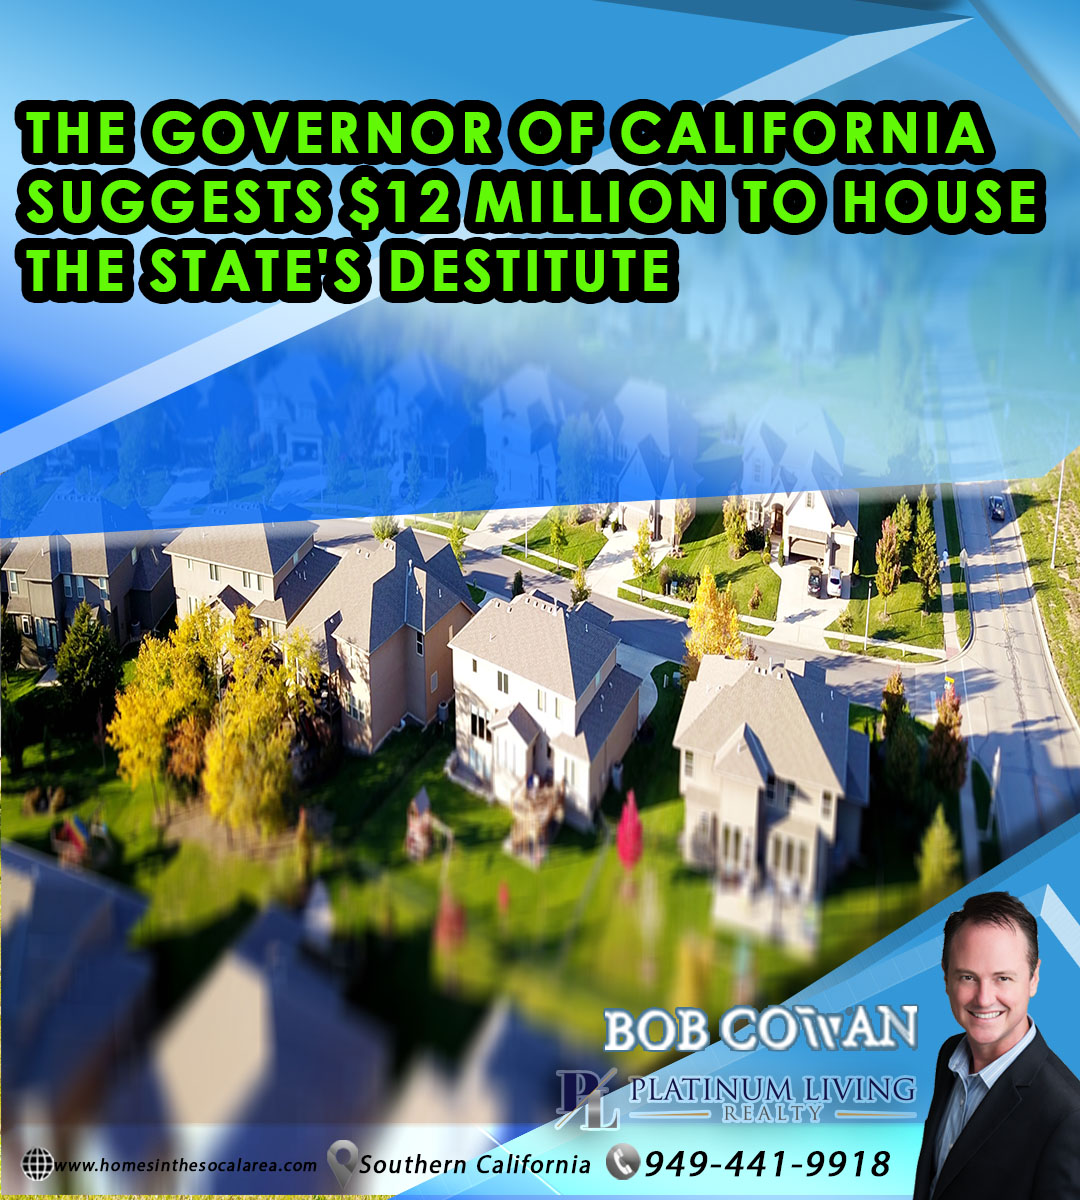 THE GOVERNOR OF CALIFORNIA SUGGESTS $12 MILLION TO HOUSE THE STATE'S DESTITUTE

👉You can find out more about this topic by going to my blog at:
homesinthesocalarea.com/blog/article/t…

#CaliLiving #WestCoastHomes #californiarealtor #caliproperty #californiahomesforsale #californialiving☀️🌴